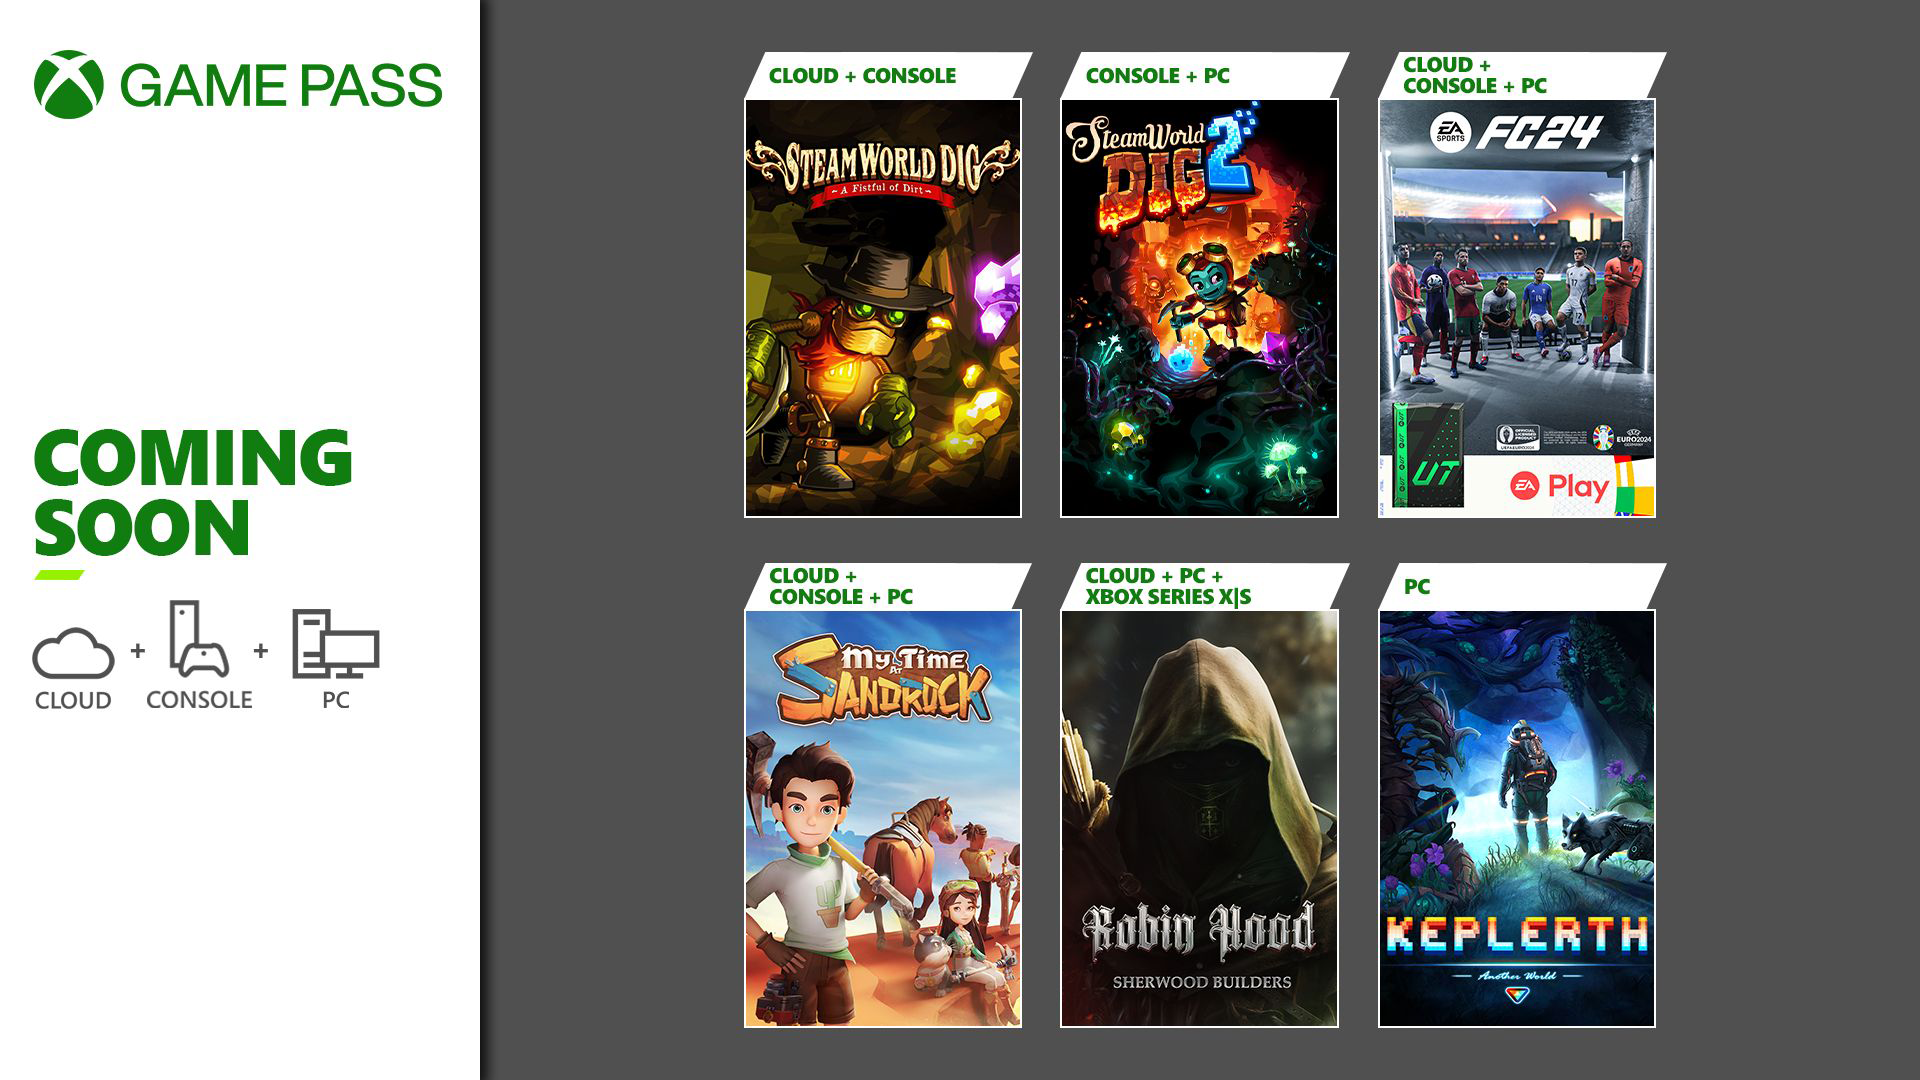 Xbox has announced several more titles heading to Game Pass in June